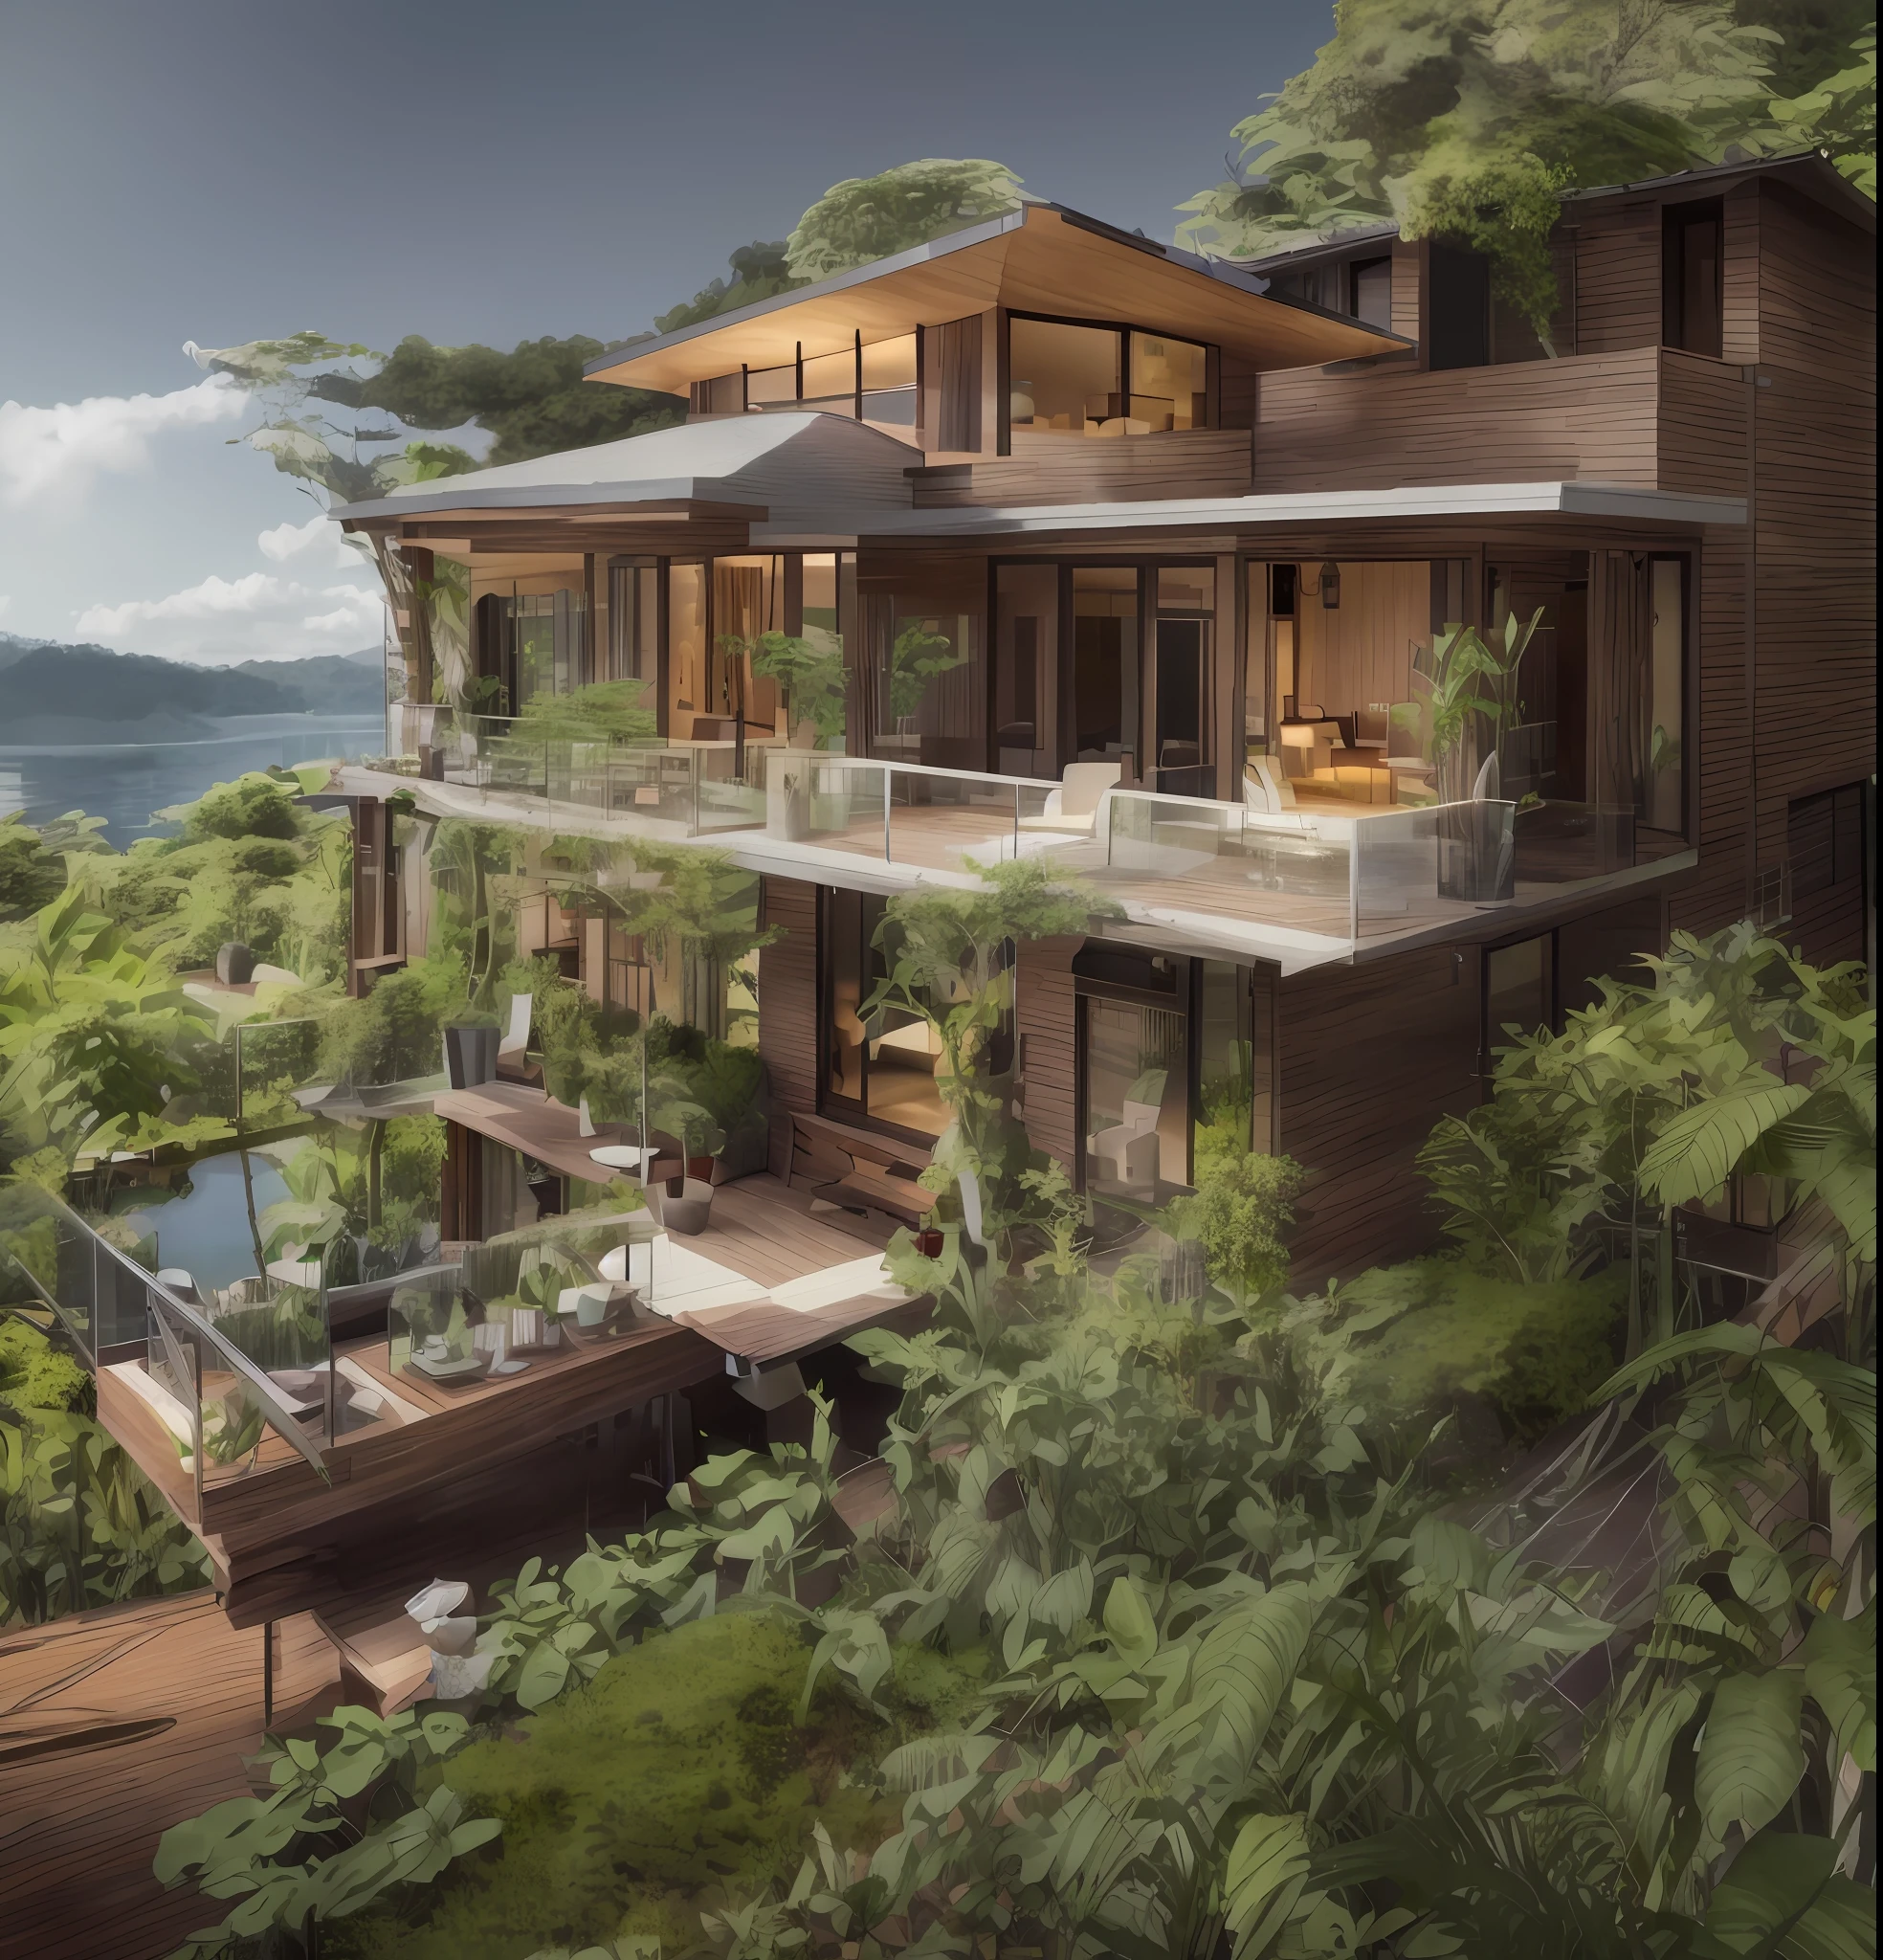 arafed house with a balcony and a balcony overlooking a lake, mountainous jungle setting, peaceful wooden mansion, award-winning render, natural realistic render, jungle setting, build in a forest near of a lake, rendered in corona, an award winning digital render, 8 k landscape render, house in forest, beautiful house on a forest path, malaysia jungle, stunning render